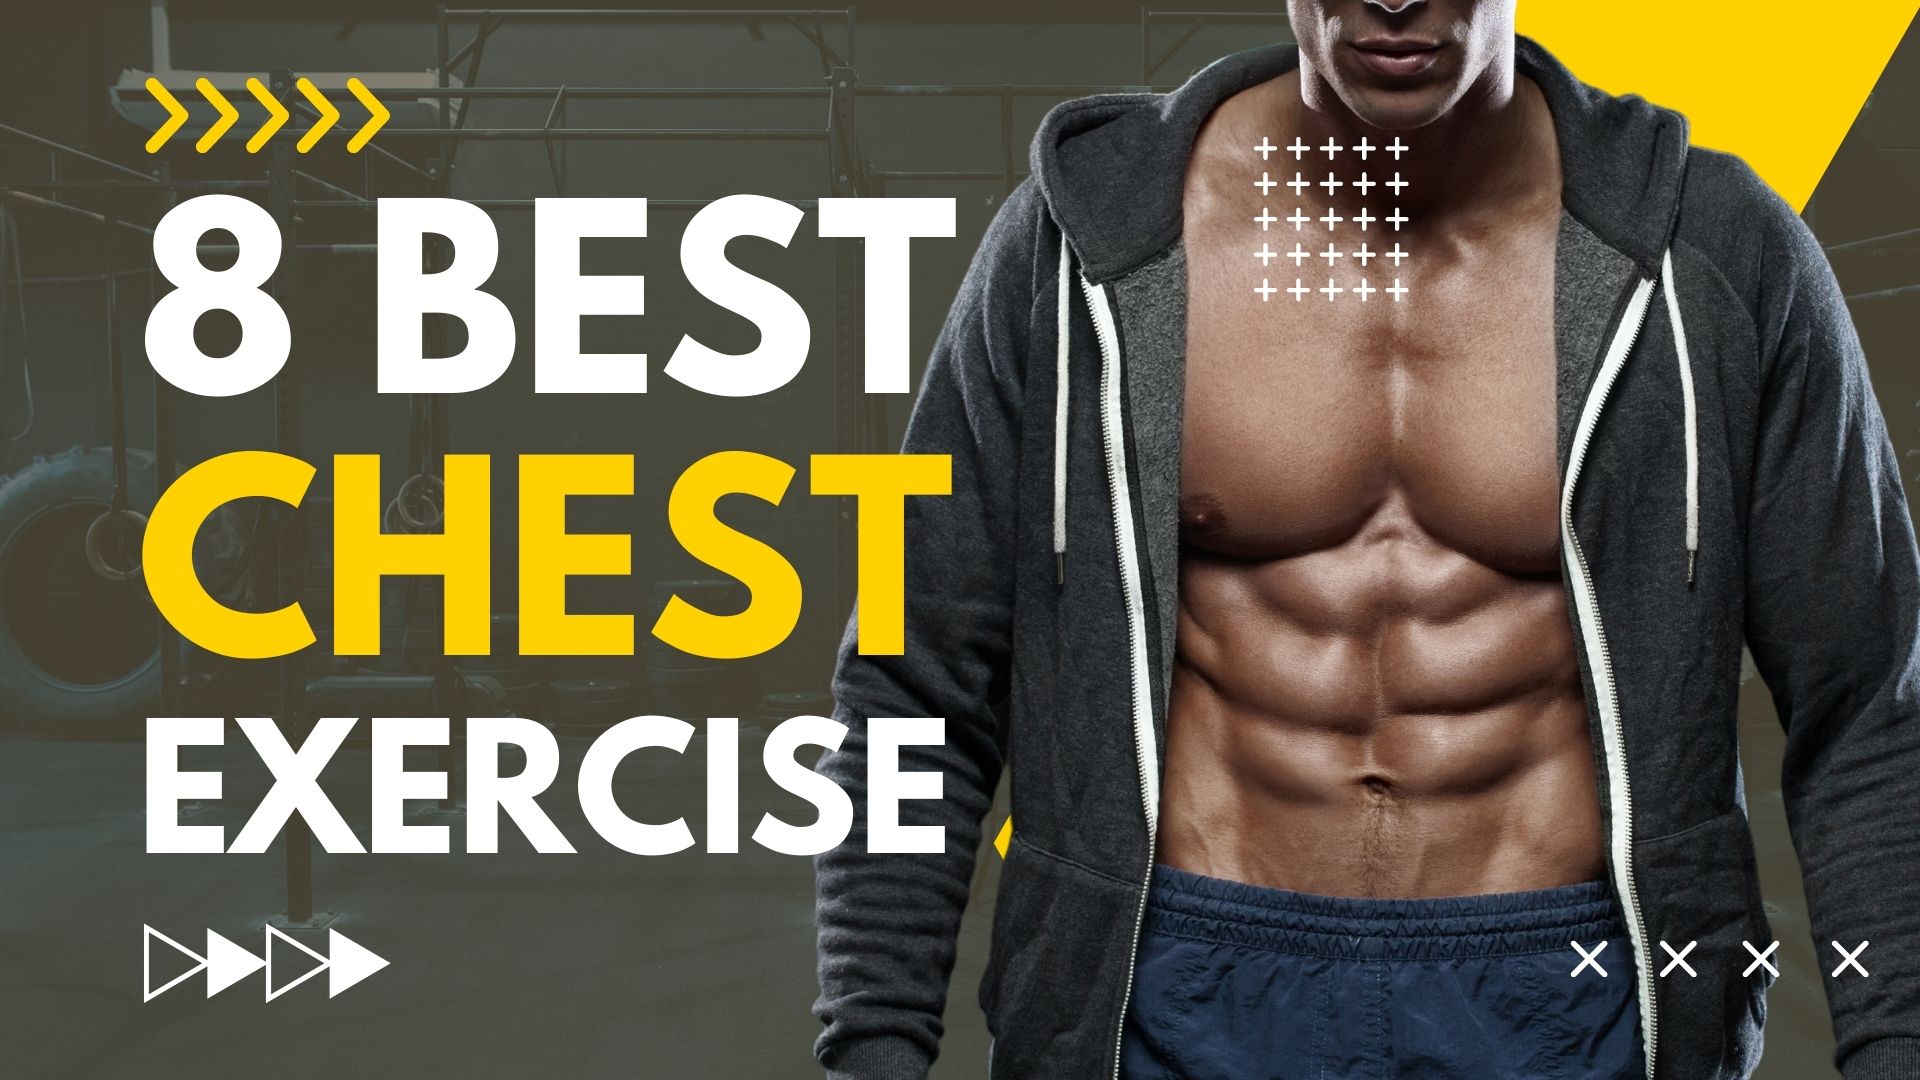 The 8 Best Exercises For Bigger Chest Muscle!